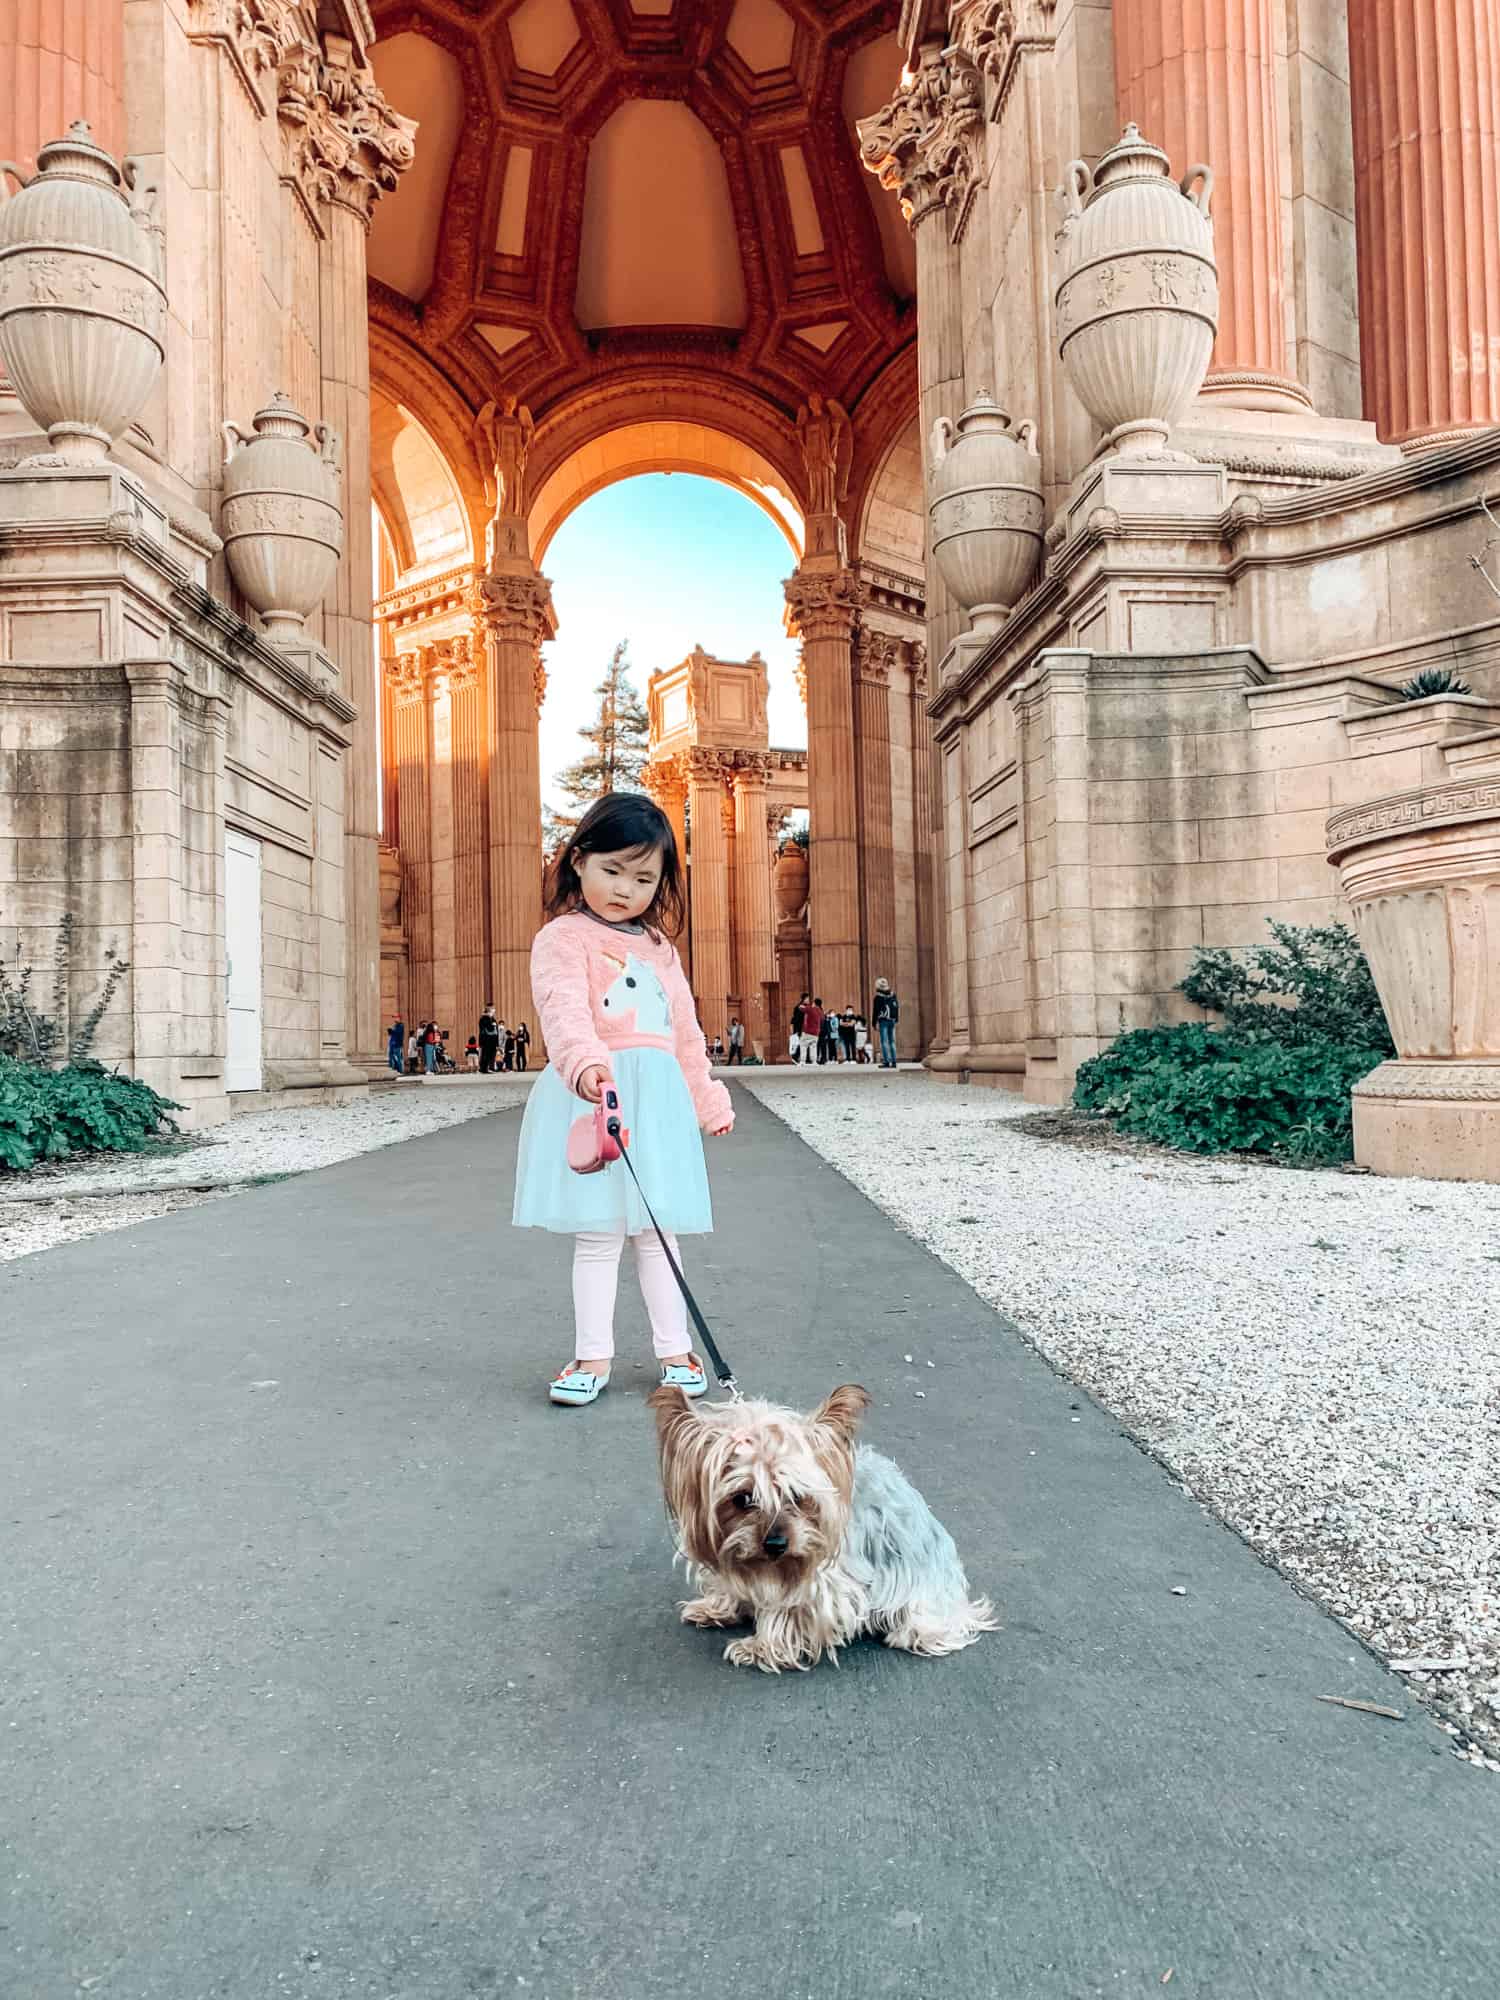 Little girl in a dress with a Yorkie dog on a leash standing in an archway